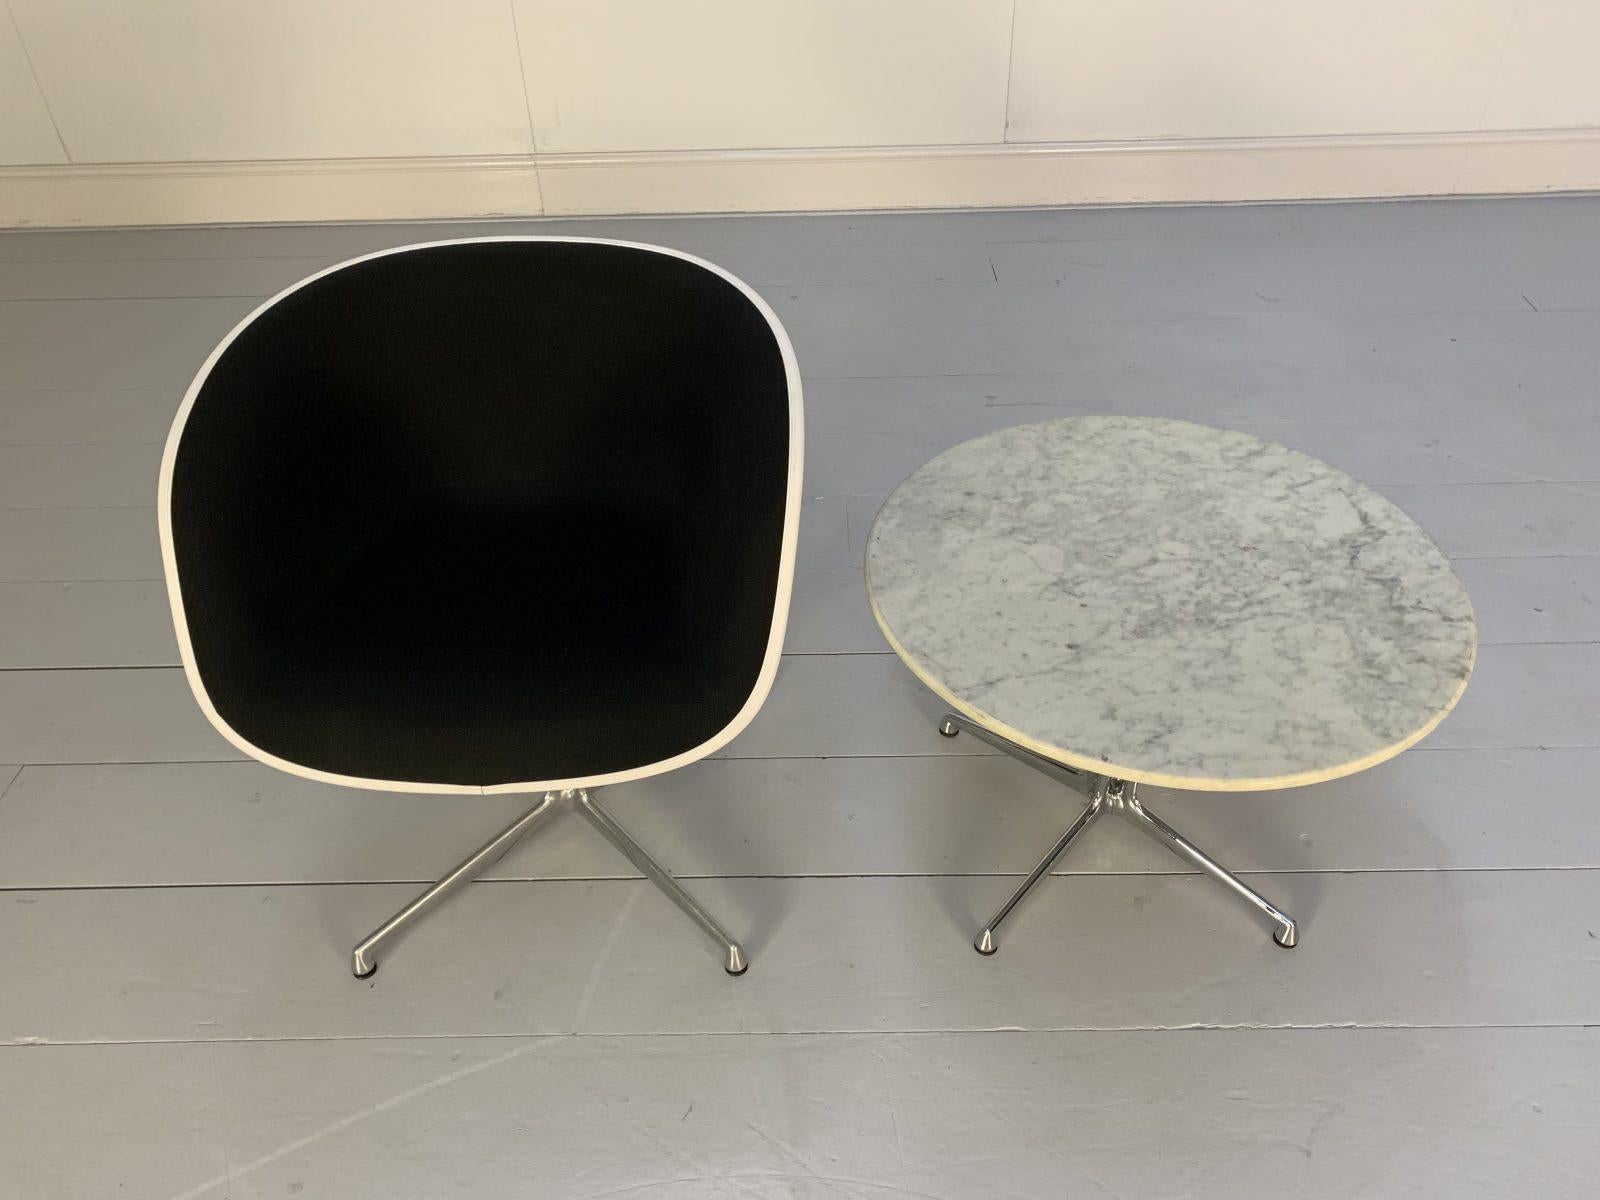 Vitra “La Fonda” Eames Chair & Marble Table in Black Hopsack In Good Condition For Sale In Barrowford, GB